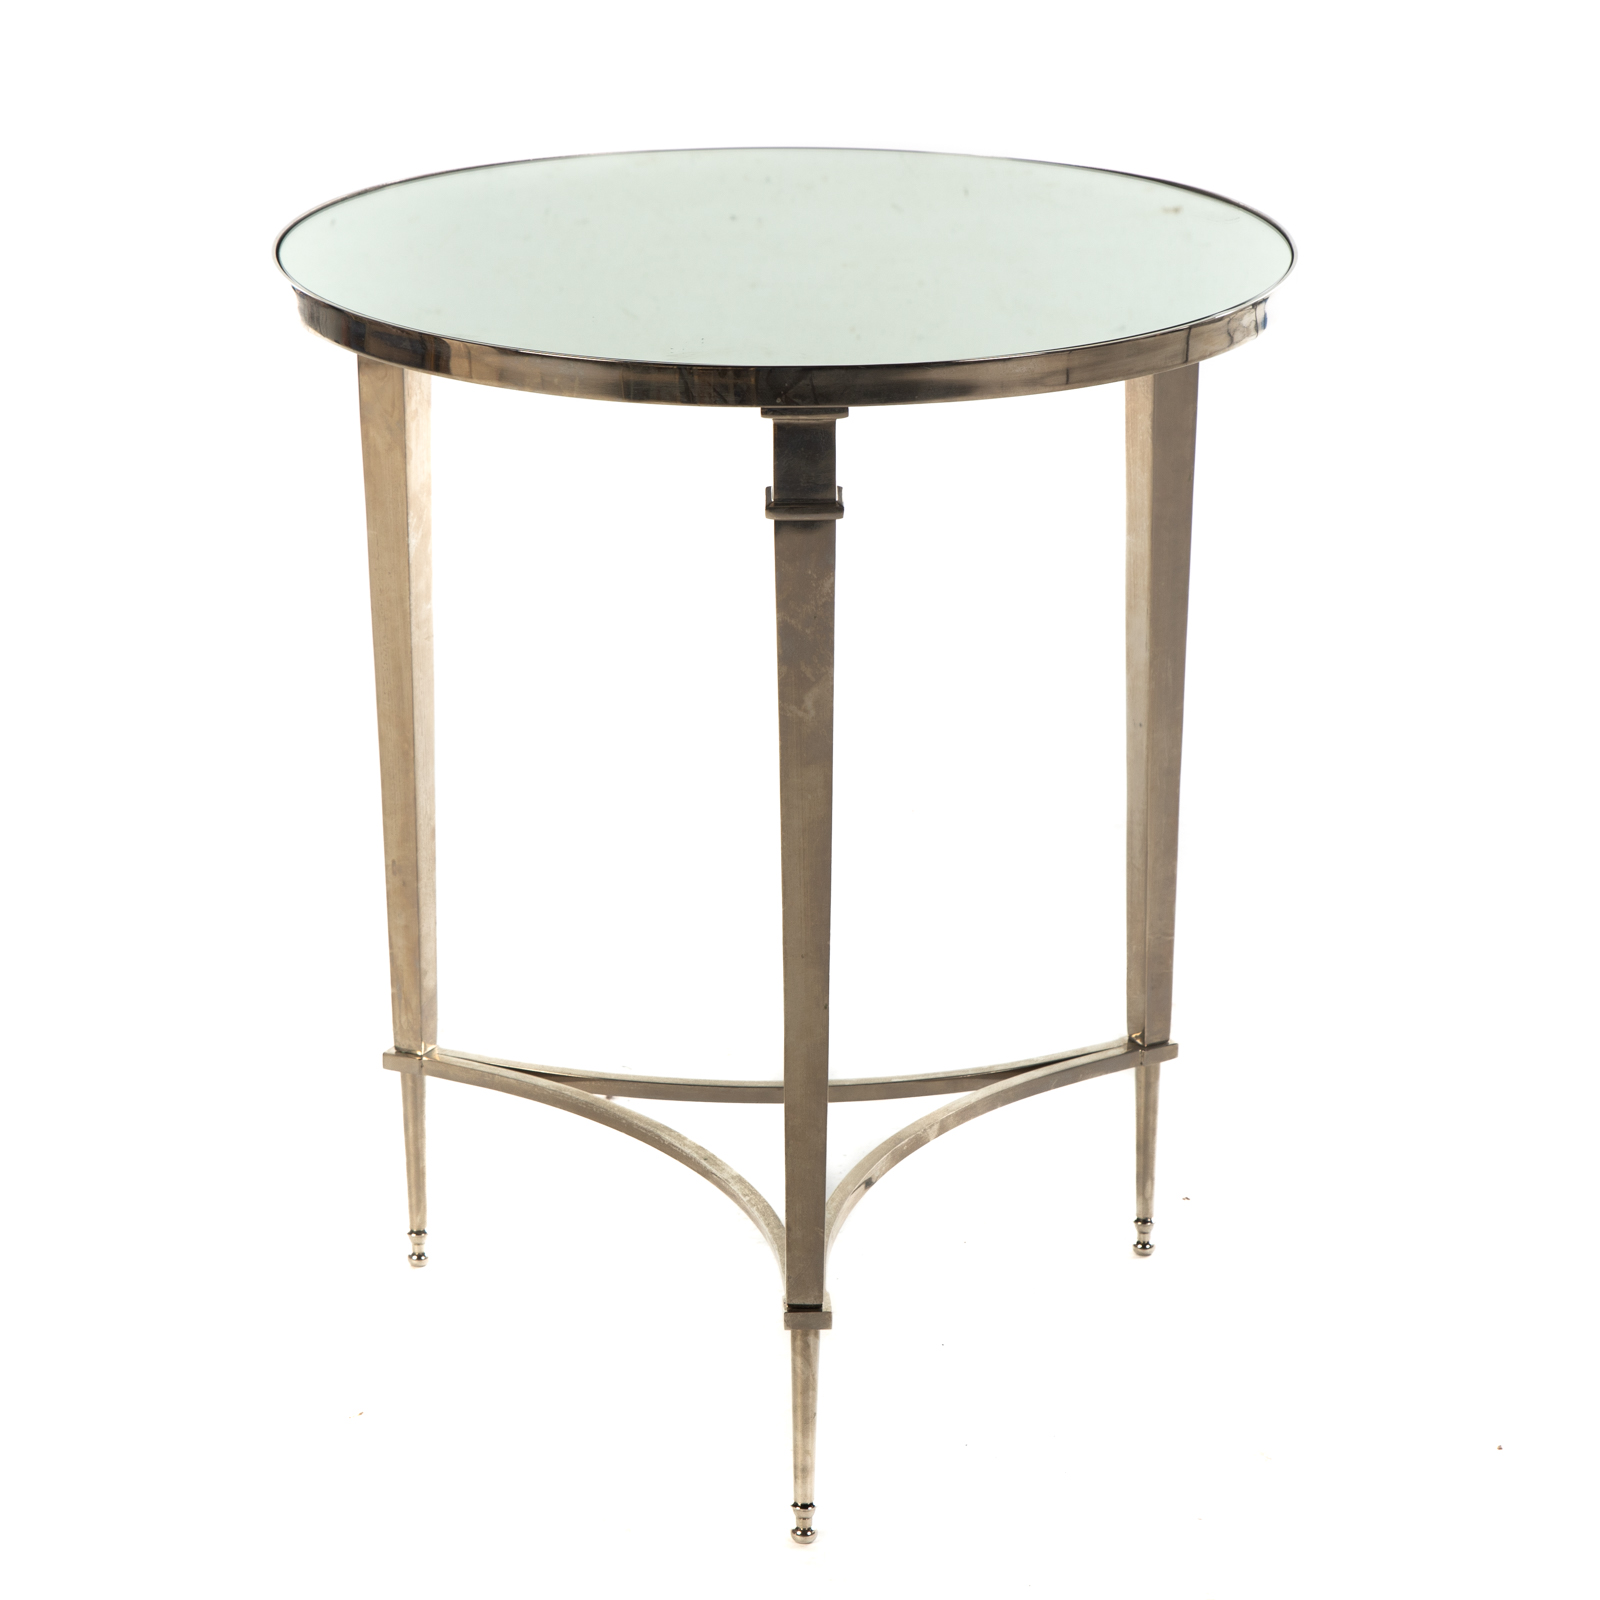 CONTEMPORARY ROUND METAL END TABLE